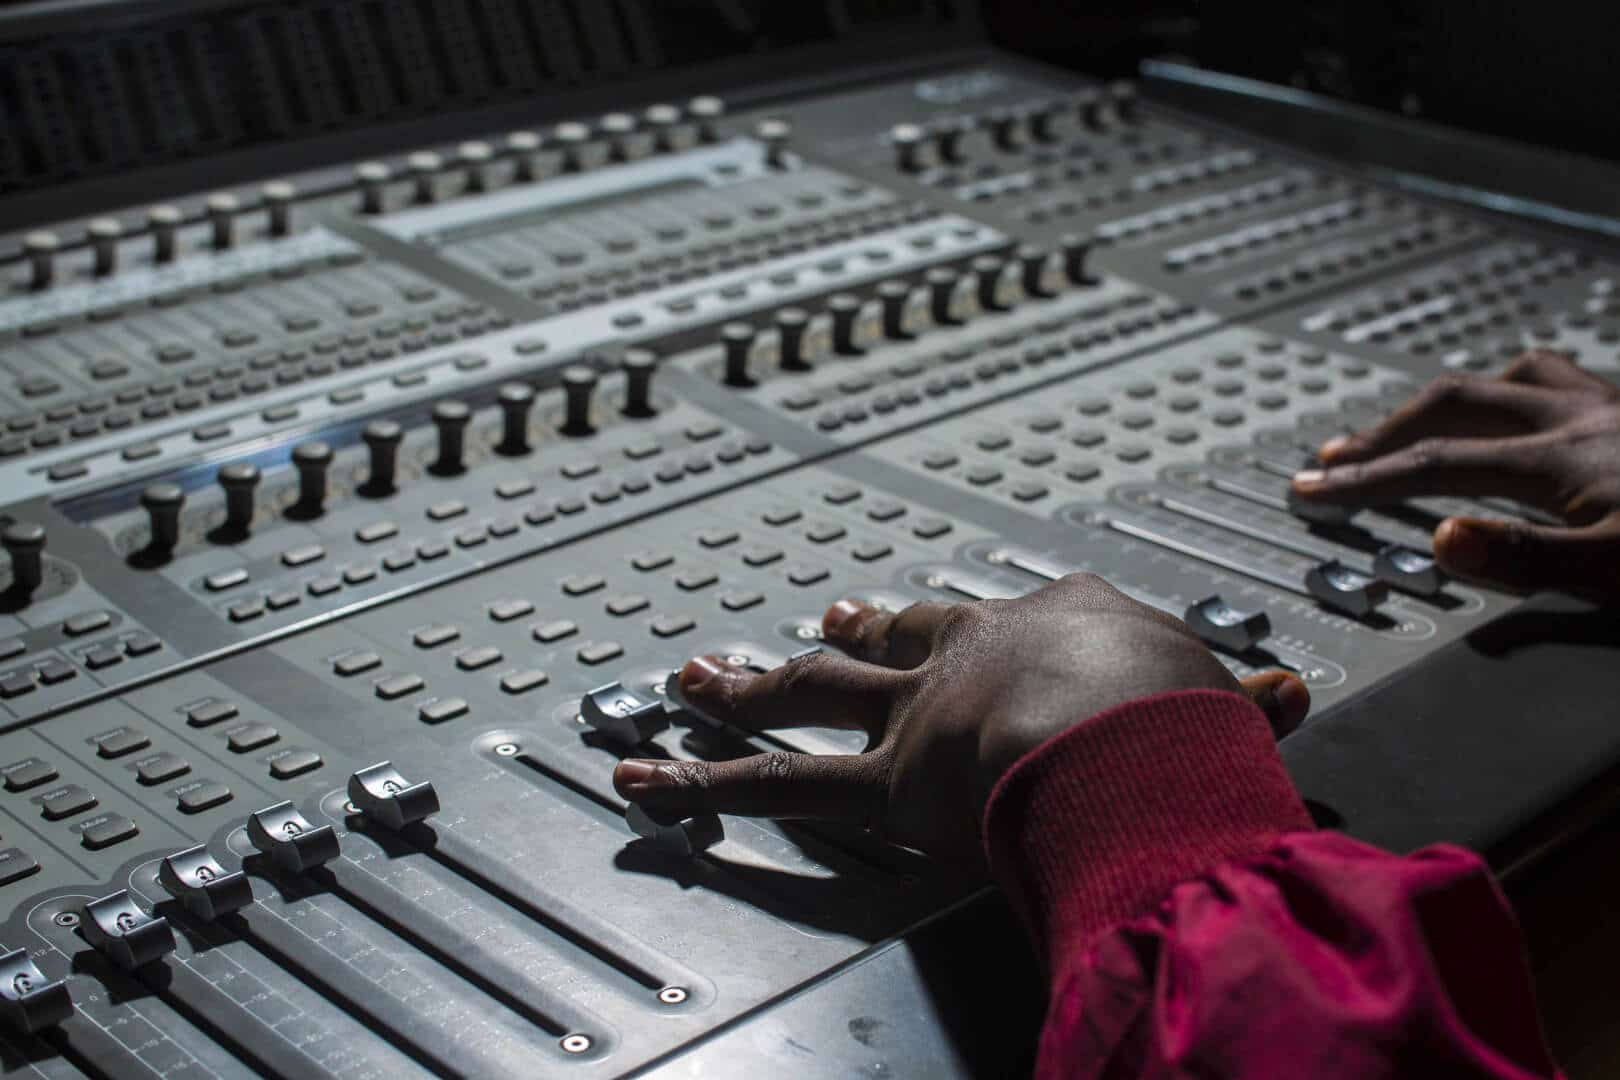 Our sound engineering course provides training in all areas of sound Live studio sound recording mixing mastering film sound design